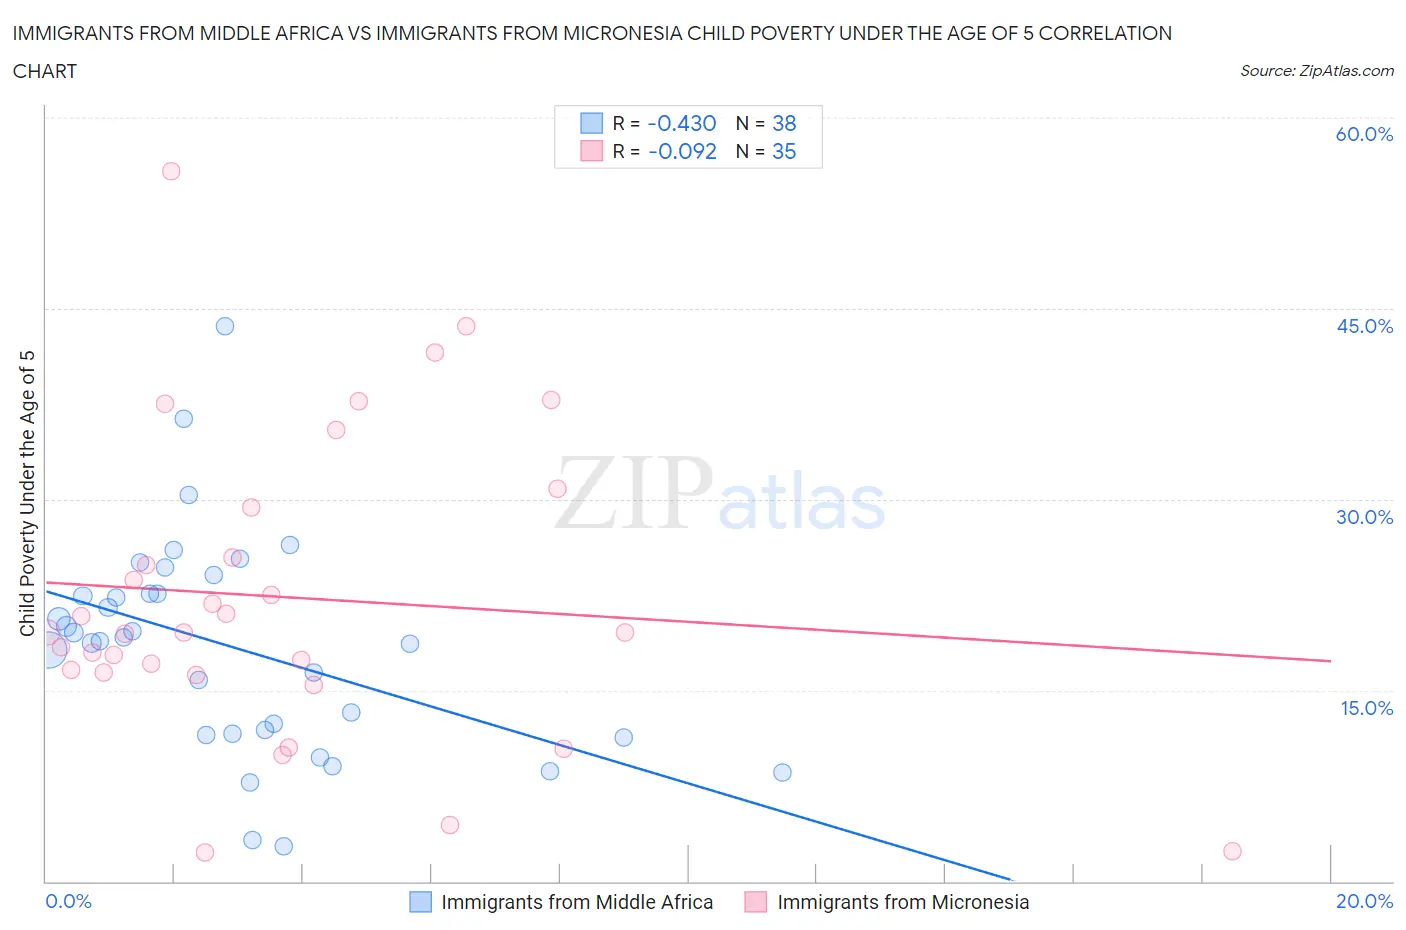 Immigrants from Middle Africa vs Immigrants from Micronesia Child Poverty Under the Age of 5